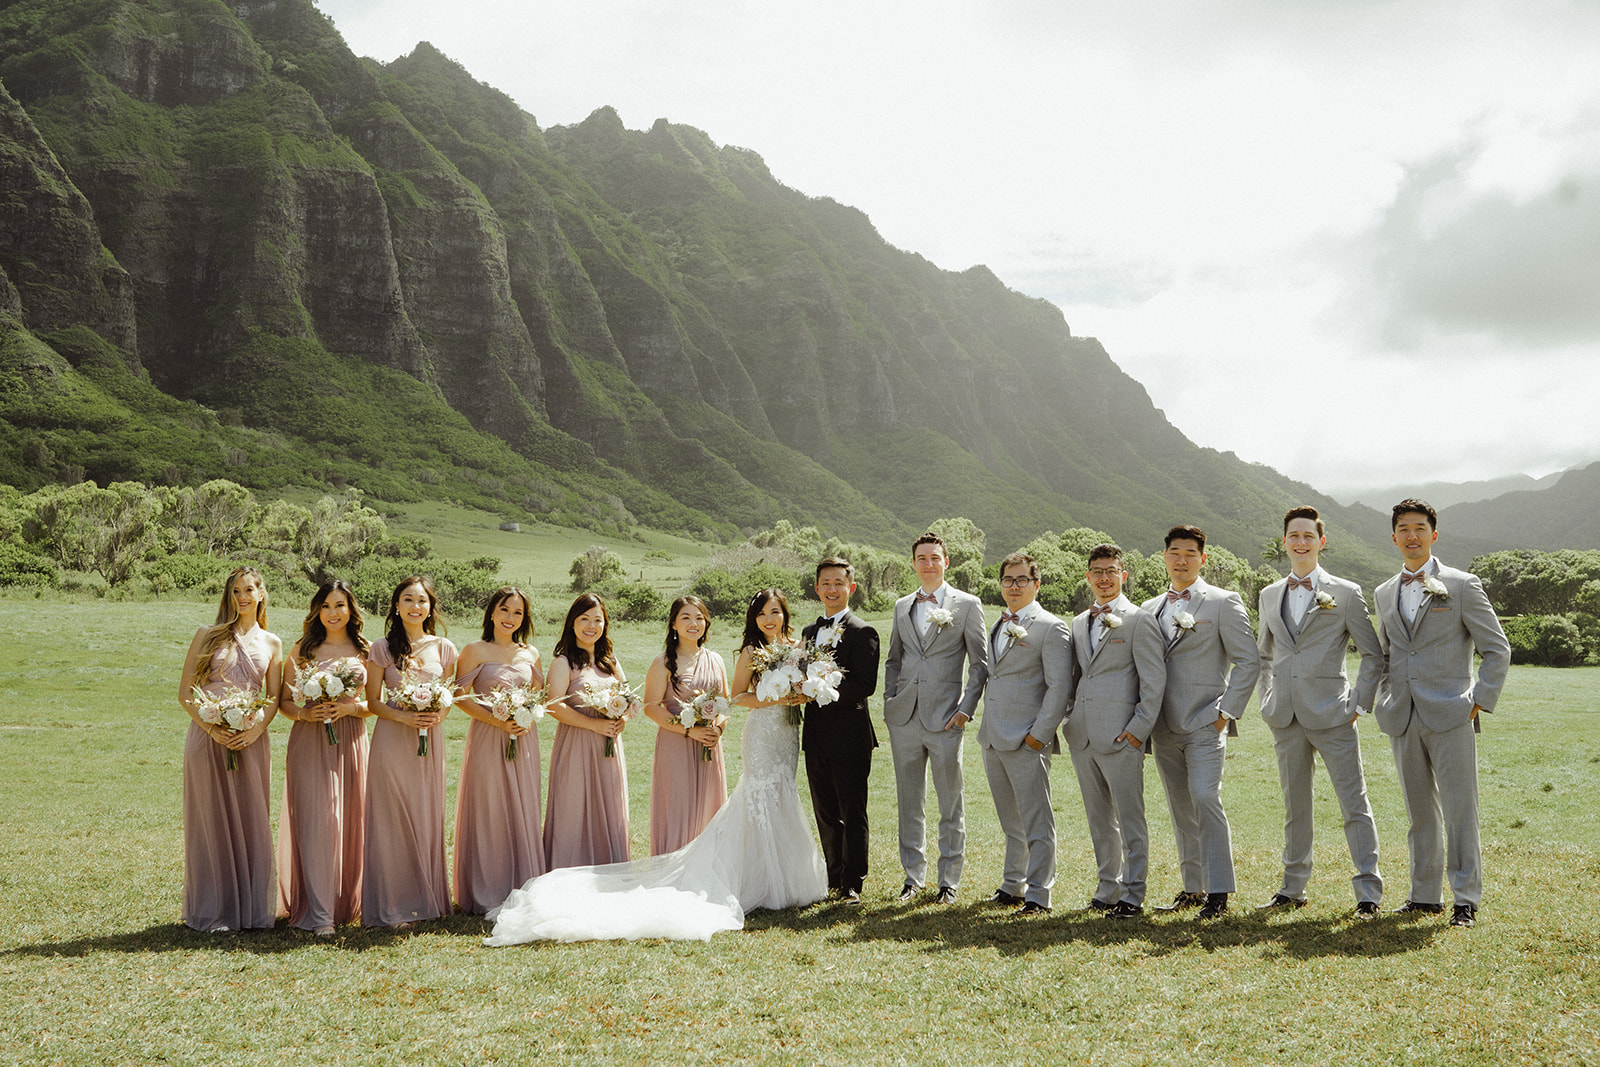 Wedding Party in iconic Jurassic Park movie location